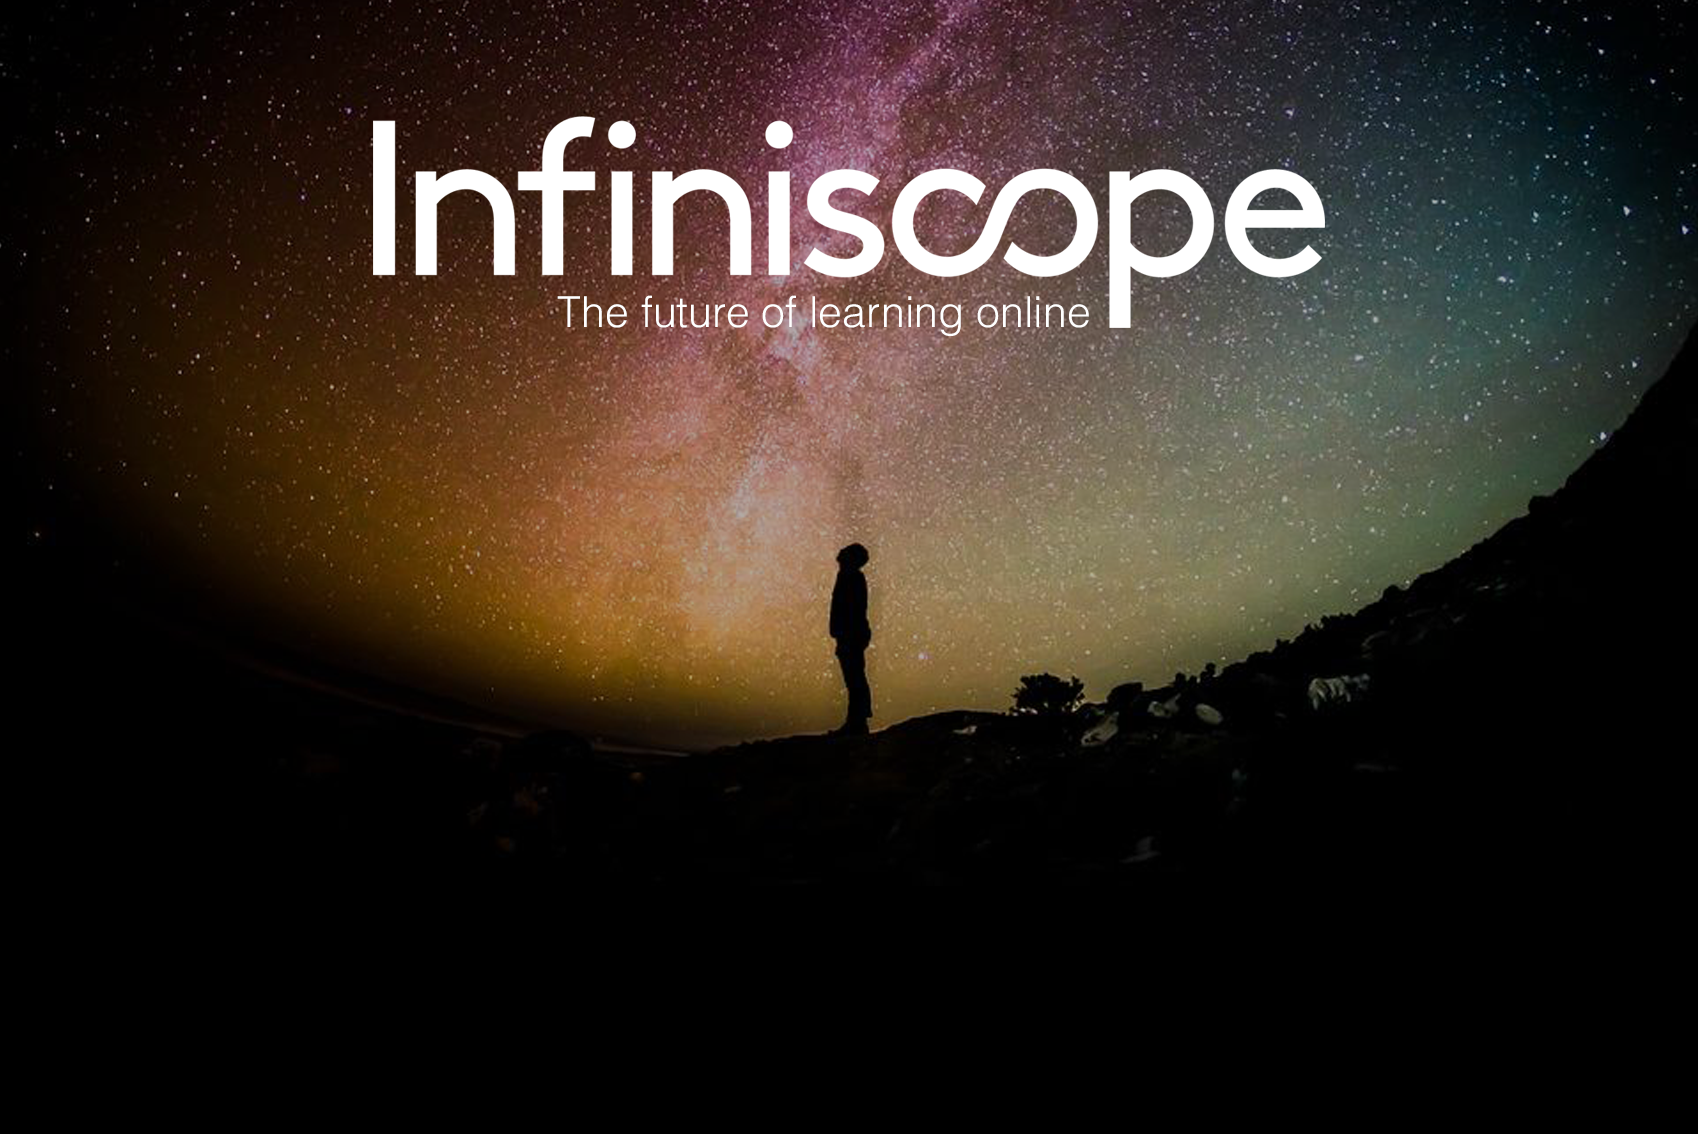 silhouette of a person against a color-enhanced galaxy in the night sky. The title reads Infiniscope.